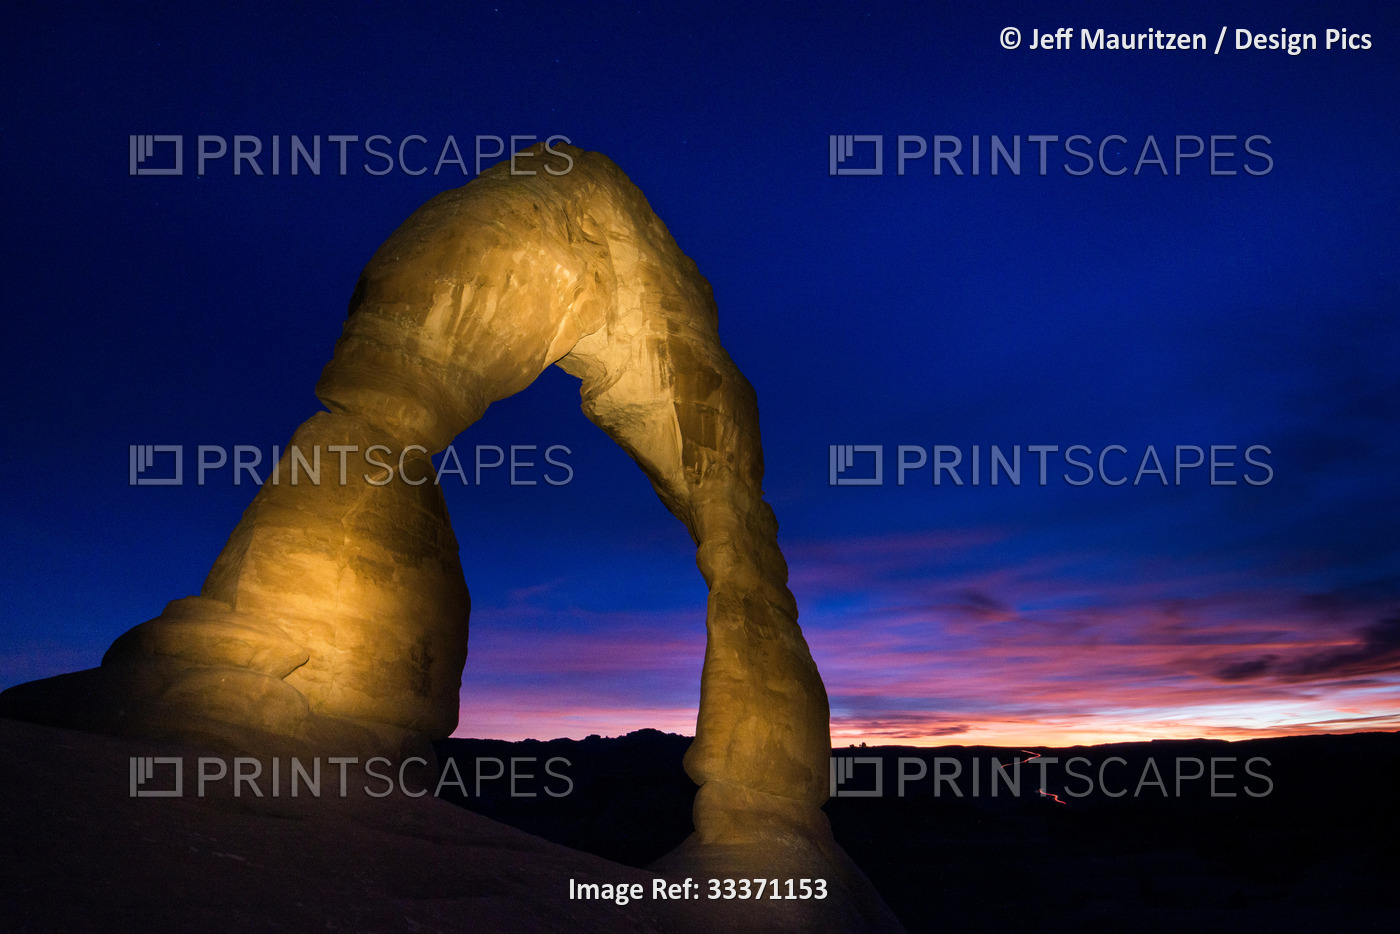 Sunset at Delicate Arch, located in Arches National Park, Utah.